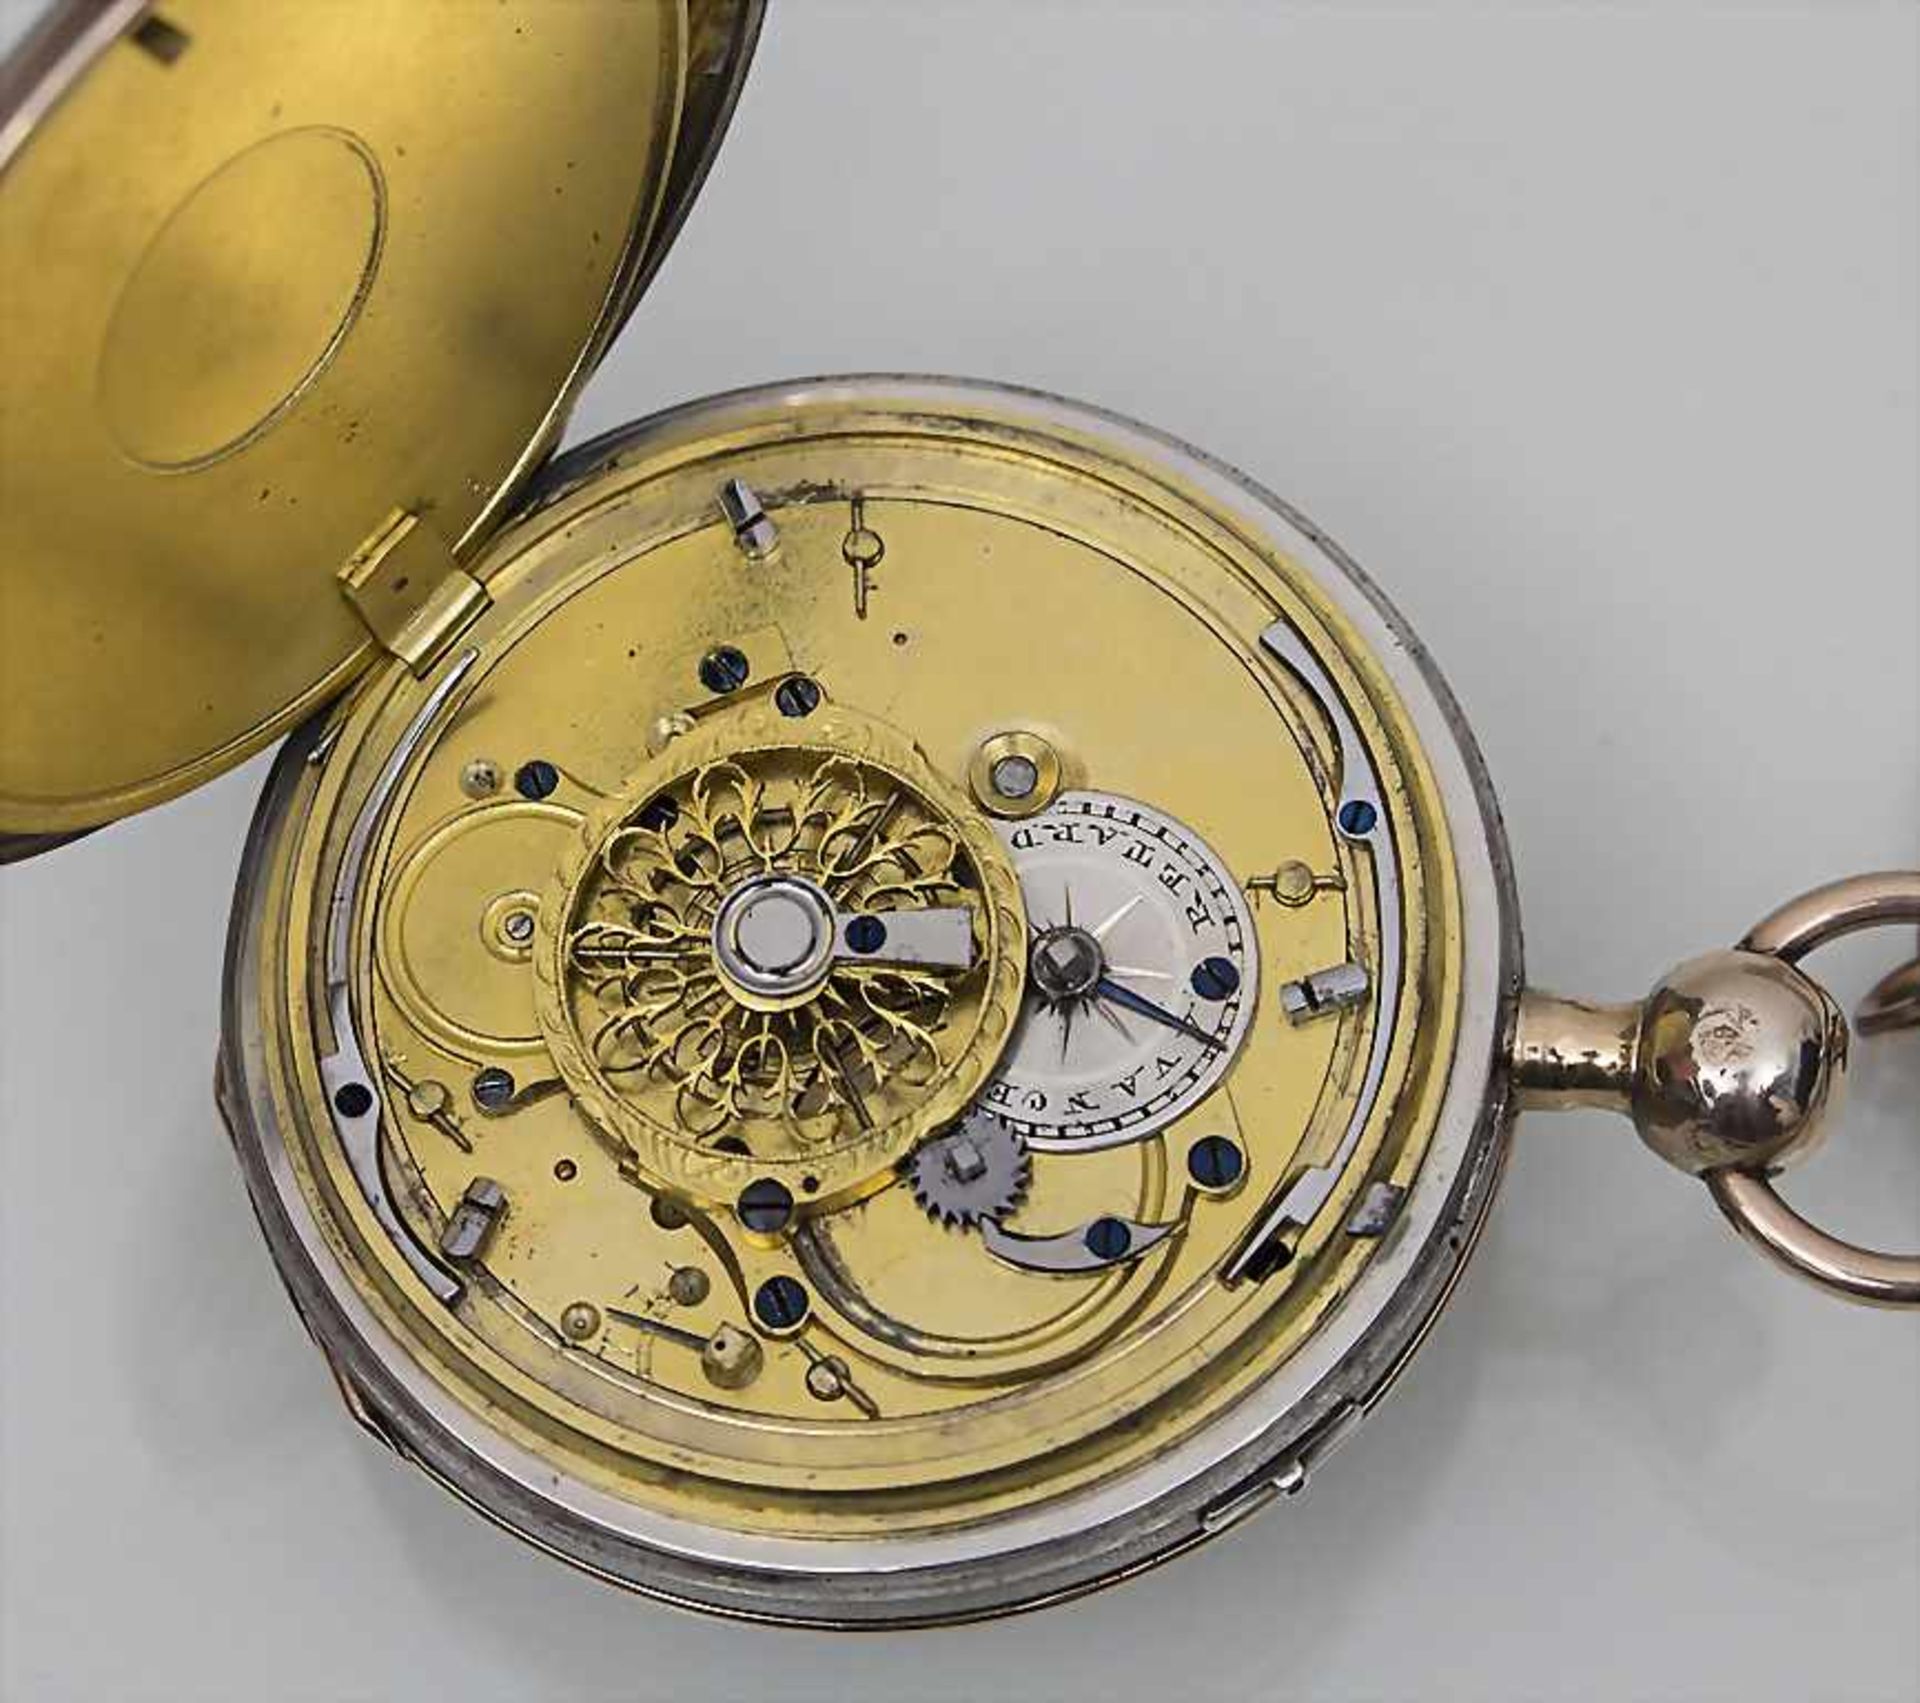 Taschenuhr / Pocket Watch, ¼-Repetition, Swiss Made, ca. 1850 - Image 2 of 2